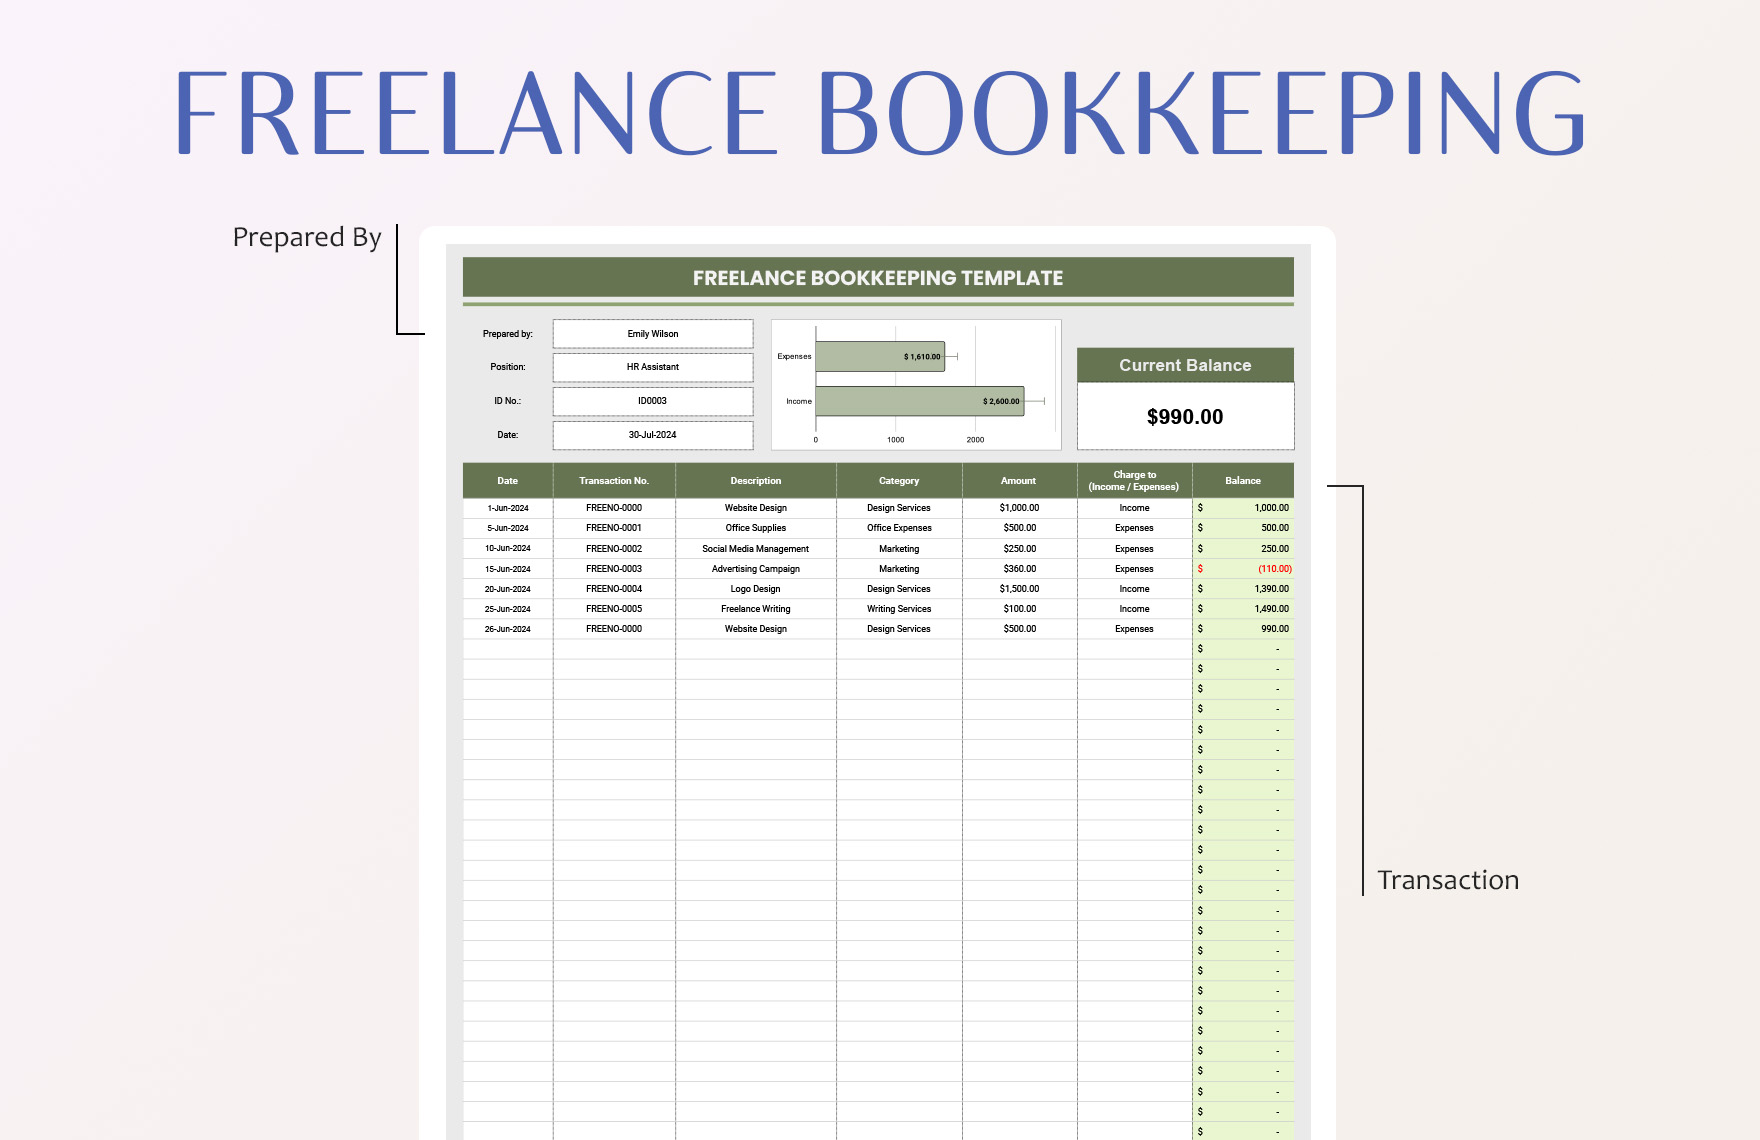 Freelance Bookkeeping Template